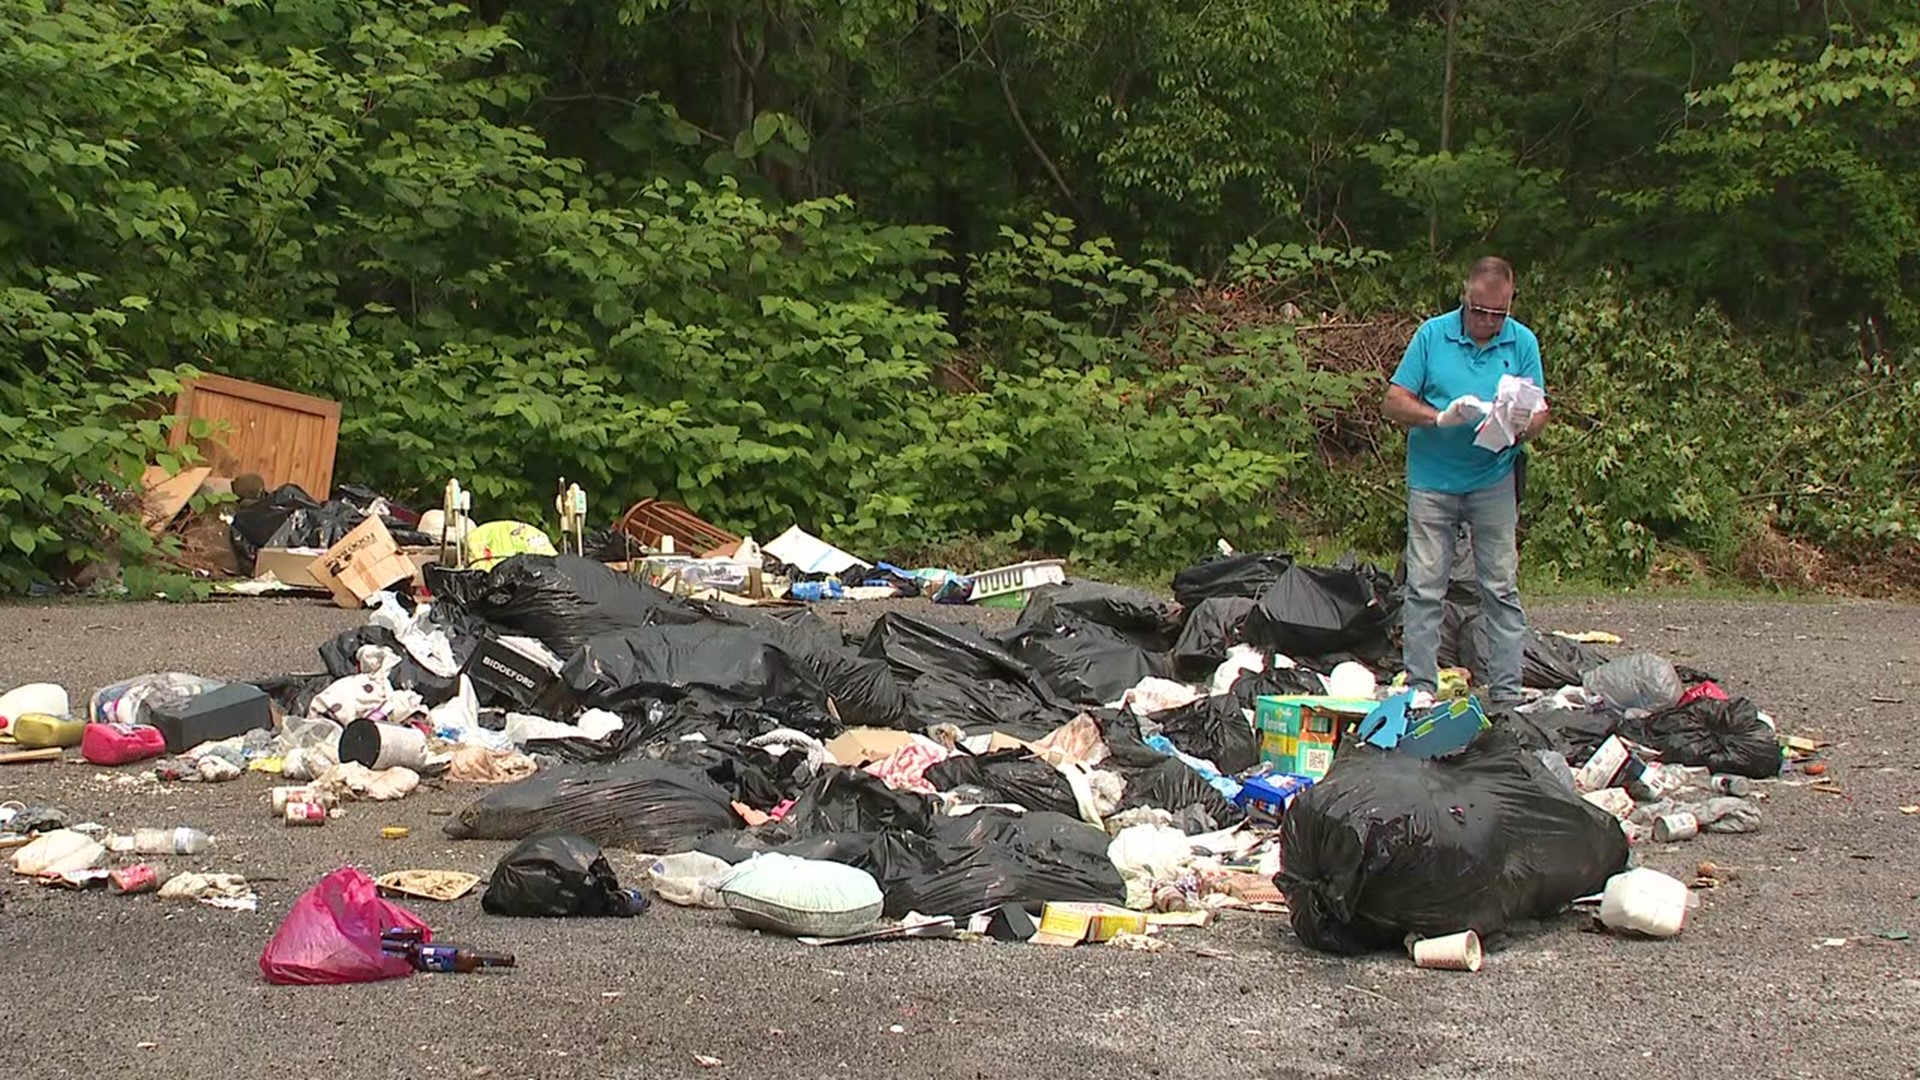 Another smelly situation outside of Centralia but this one does not involve smoke—people are illegally dumping garbage and lots of it.